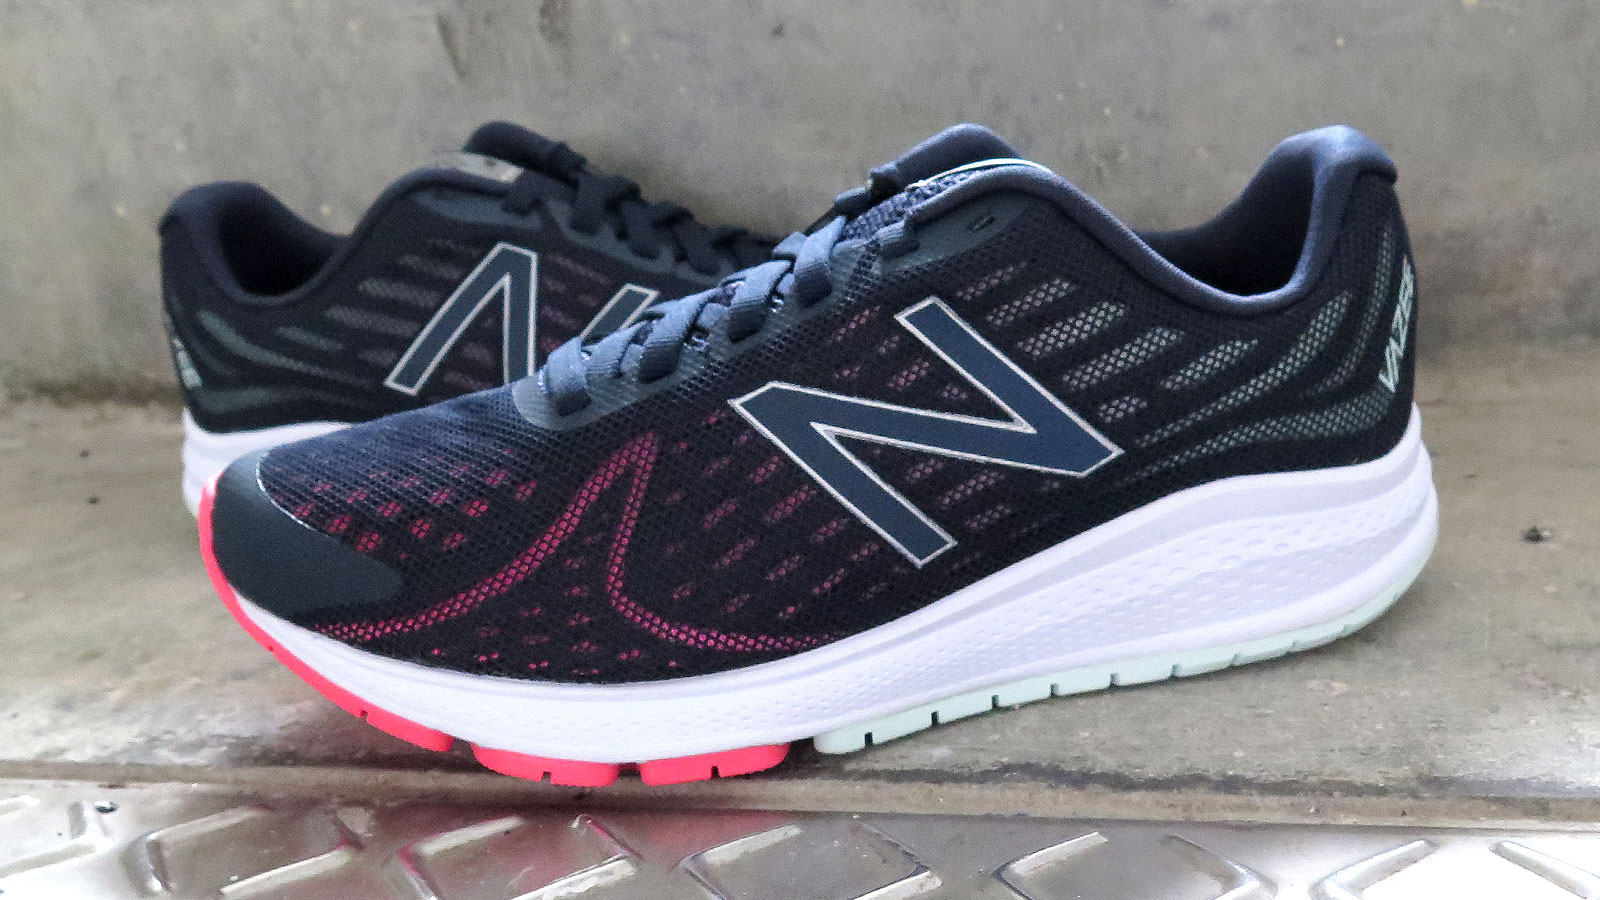 How The New Balance Vazee Rush v2 Women's Shoes Help Me Find Balance